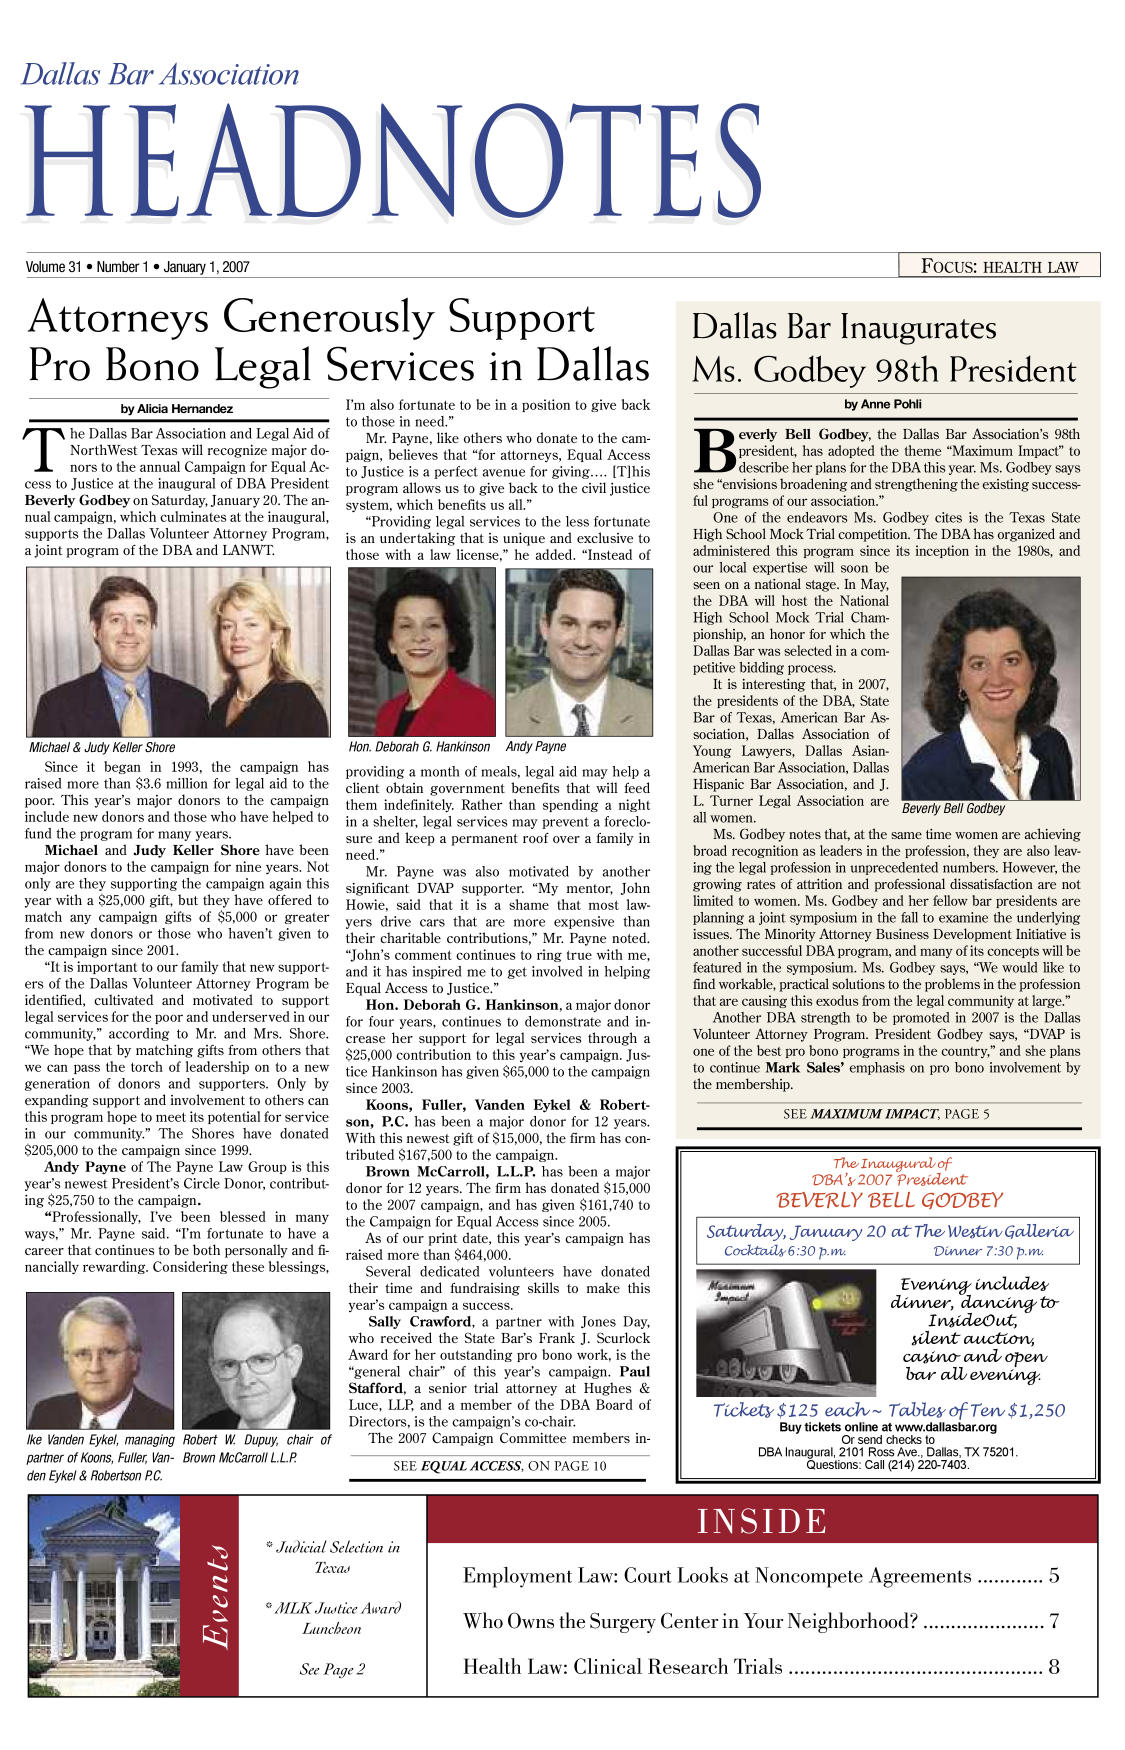 handle is hein.barjournals/hdba0031 and id is 1 raw text is: 



Dallas Bar Association


Volume 31,9 Number 1,9 January 1, 2007                                                                                          FocUS: HEALTH LAW


Attorneys Generously Support


Pro Bono Legal Services in Dallas


              by Alicia Hernandez

he Dallas Bar Association and Legal Aid of
       NorthWest Texas will recognize major do-
       nors to the annual Campaign for Equal Ac-
cess to Justice at the inaugural of DBA President
Beverly Godbey on Saturday, January 20. The an-
nual campaign, which culminates at the inaugural,
supports the Dallas Volunteer Attorney Program,
a joint program of the DBA and LANWT.


Michael & Judy Keller Shore
   Since it began in 1993, the campaign has
raised more than $3.6 million for legal aid to the
poor. This year's major donors to the campaign
include new donors and those who have helped to
fund the program for many years.
   Michael and Judy Keller Shore have been
major donors to the campaign for nine years. Not
only are they supporting the campaign again this
year with a $25,000 gift, but they have offered to
match any campaign gifts of $5,000 or greater
from new donors or those who haven't given to
the campaign since 2001.
   It is important to our family that new support-
ers of the Dallas Volunteer Attorney Program be
identified, cultivated and motivated to support
legal services for the poor and underserved in our
community, according to Mr. and Mrs. Shore.
We hope that by matching gifts from others that
we can pass the torch of leadership on to a new
generation of donors and supporters. Only by
expanding support and involvement to others can
this program hope to meet its potential for service
in our community. The Shores have donated
$205,000 to the campaign since 1999.
   Andy Payne of The Payne Law Group is this
year's newest President's Circle Donor, contribut-
ing $25,750 to the campaign.
   Professionally, I've been blessed in many
ways, Mr. Payne said. I'm fortunate to have a
career that continues to be both personally and fi-
nancially rewarding. Considering these blessings,


Ike Vanden Eykel, managing Robert W Dupuy, chair of
partner of Koons, Fuller, Van- Brown McCarroll L.L.P
den Eykel & Robertson PC.


I'm also fortunate to be in a position to give back
to those in need.
   Mr. Payne, like others who donate to the cam-
paign, believes that for attorneys, Equal Access
to Justice is a perfect avenue for giving.... [Tihis
program allows us to give back to the civil justice
system, which benefits us all.
   Providing legal services to the less fortunate
is an undertaking that is unique and exclusive to
those with a law license, he added. Instead of


Hon. Deborah G. Hankinson Andy Payne
providing a month of meals, legal aid may help a
client obtain government benefits that will feed
them indefinitely. Rather than spending a night
in a shelter, legal services may prevent a foreclo-
sure and keep a permanent roof over a family in
need.
   Mr. Payne was also motivated by another
significant DVAP supporter. My mentor, John
Howie, said that it is a shame that most law-
yers drive cars that are more expensive than
their charitable contributions, Mr. Payne noted.
John's comment continues to ring true with me,
and it has inspired me to get involved in helping
Equal Access to Justice.
   Hon. Deborah G. Hankinson, a major donor
for four years, continues to demonstrate and in-
crease her support for legal services through a
$25,000 contribution to this year's campaign. Jus-
tice Hankinson has given $65,000 to the campaign
since 2003.
   Koons, Fuller, Vanden Eykel & Robert-
son, P.C. has been a major donor for 12 years.
With this newest gift of $15,000, the firm has con-
tributed $167,500 to the campaign.
   Brown McCarroll, L.L.P. has been a major
donor for 12 years. The firm has donated $15,000
to the 2007 campaign, and has given $161,740 to
the Campaign for Equal Access since 2005.
   As of our print date, this year's campaign has
raised more than $464,000.
   Several dedicated volunteers have donated
 their time and fundraising skills to make this
 year's campaign a success.
   Sally Crawford, a partner with Jones Day,
 who received the State Bar's Frank J. Scurlock
 Award for her outstanding pro bono work, is the
 general chair of this year's campaign. Paul
 Stafford, a senior trial attorney at Hughes &
 Luce, LLP, and a member of the DBA Board of
 Directors, is the campaign's co-chair.
   The 2007 Campaign Committee members in-
       SEE EQUAL ACCESS, ON PAGE 10


Judicial Selection in
      Texad

AMILK Justice Avard
    Luncheon


See Page 2


Employment Law: Court Looks at Noncompete Agreements ............ 5


Who Owns the Surgery Center in Your Neighborhood?............... 7


Health   Law: Clinical Research  Trials ......................................... 8


                  The lntt at o f
               DBA'k2007 rS&e4eLt-
          BEVERLY BELL GODBEY

Sa iwday, Jcwn ray 20 a   The WeVtn GcaUera
   Cocktads6:30 p.mw.           Dnner 7:30 p.mi


                          dim , dag t



                            Cc4noa a    d opeV
                            bar c l ev        t


 Tce-s$125 ezh~ TW~esofTe4i $ 1,250
          Buy tickets online at www.dallasbar.org
                   Or send checks to
       DBA Inaugural, 2101 Ross Ave., Dallas, TX 75201.
              Questions: Call (214) 220-7403.


